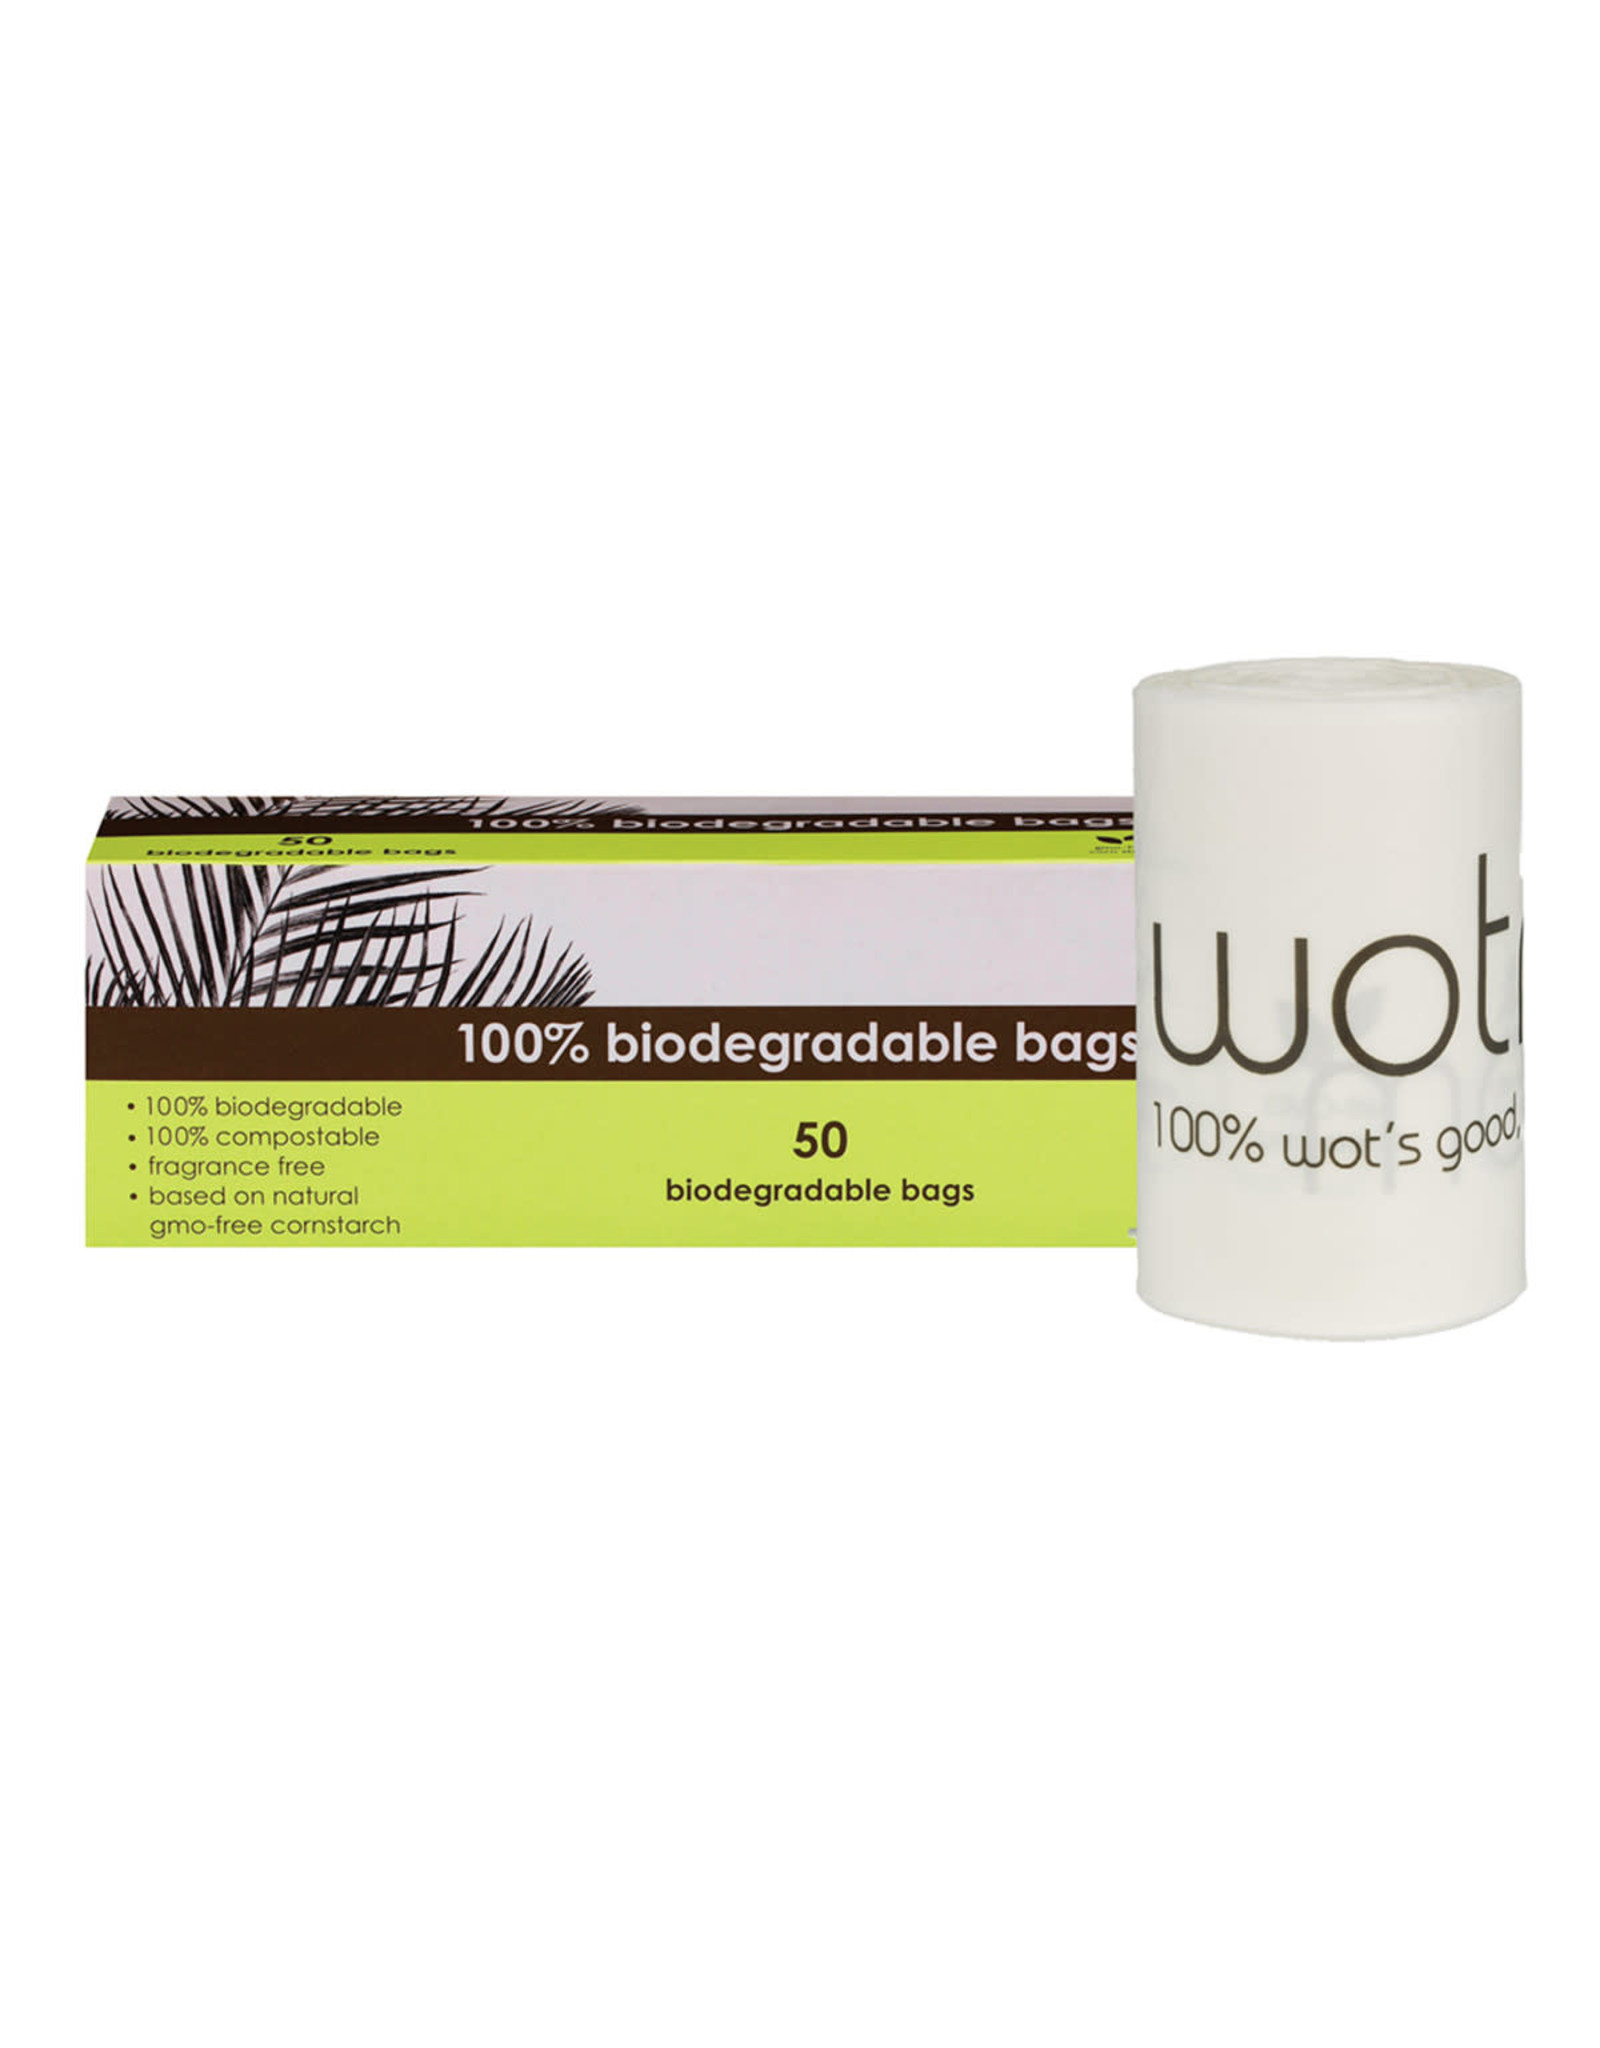 Wotnot Biodegradable Nappy Bags pk 50